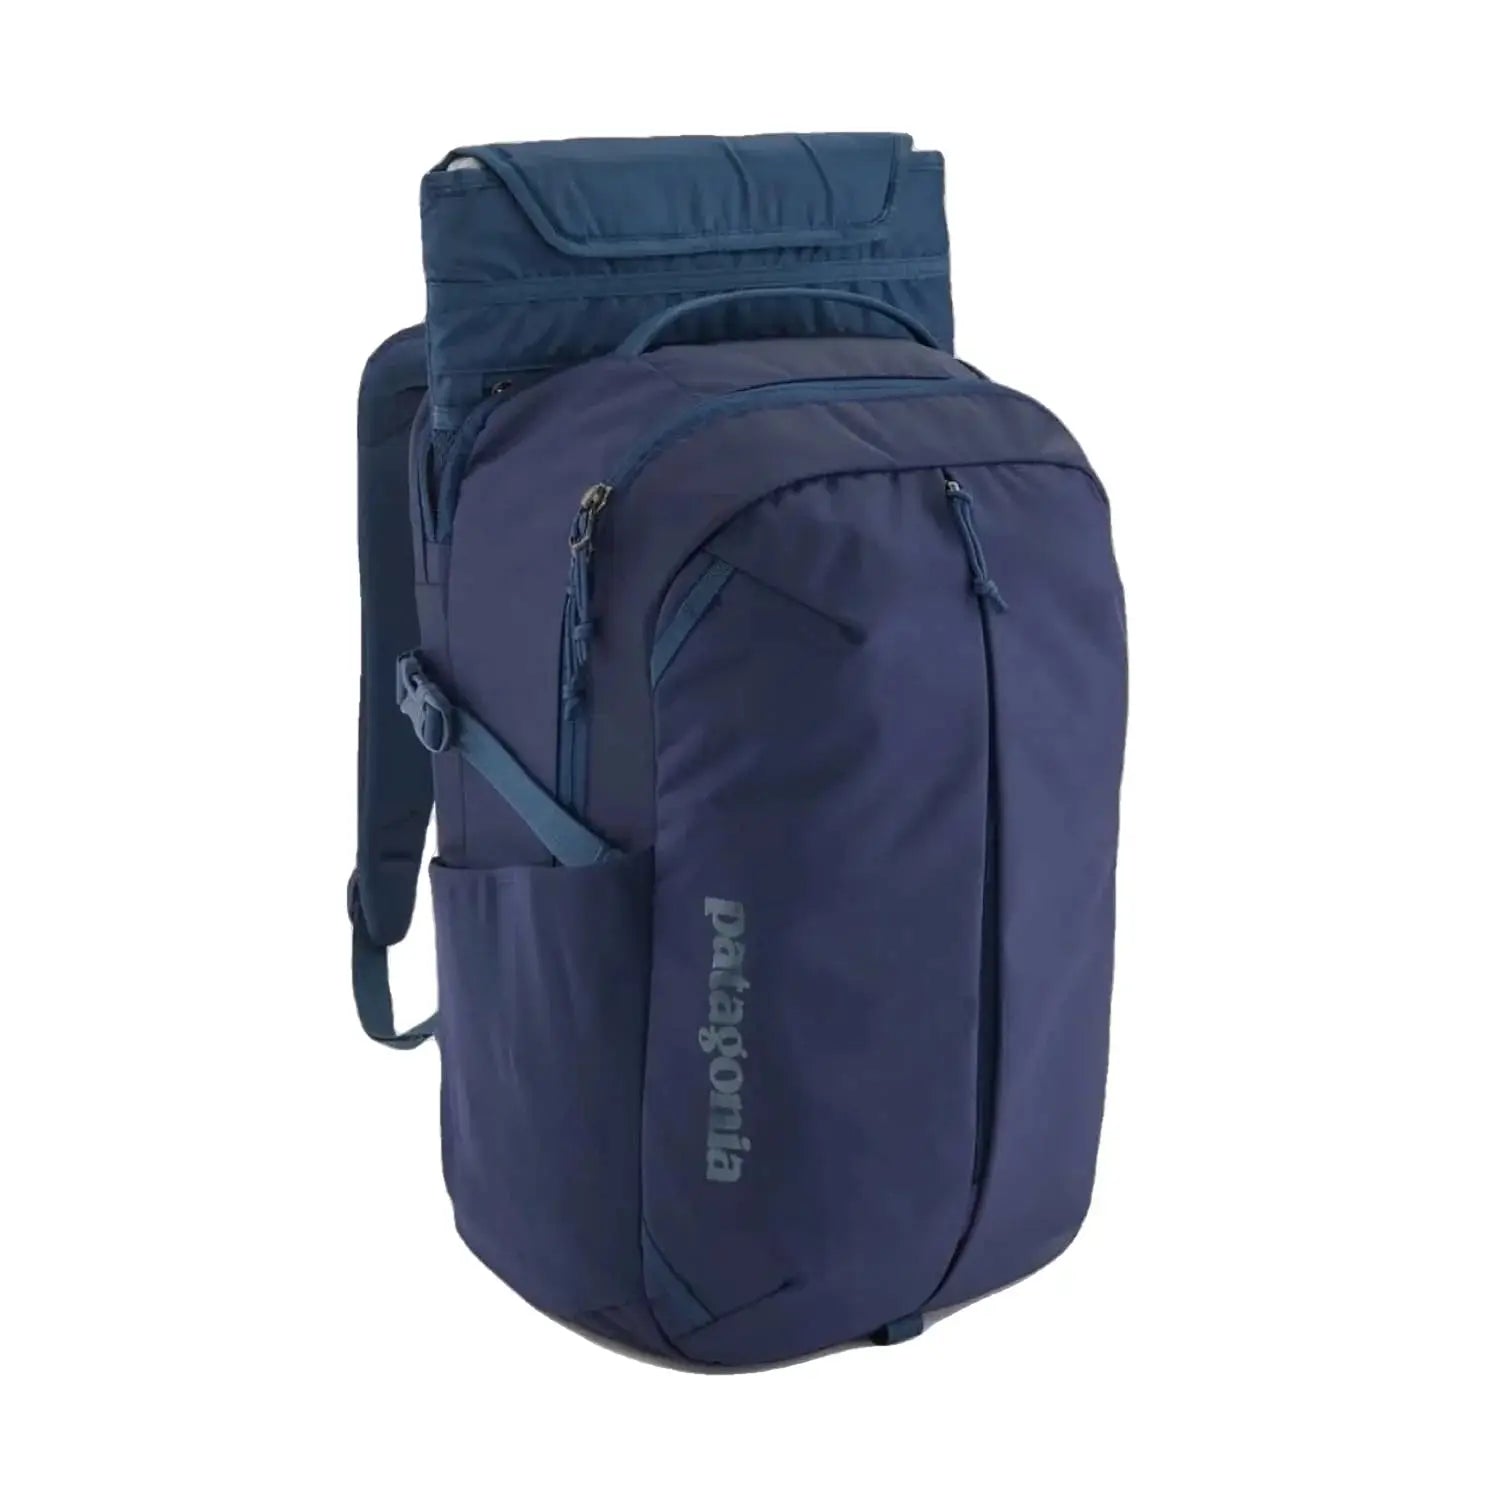 Patagonia refugio daypack 26L, classic navy, front view